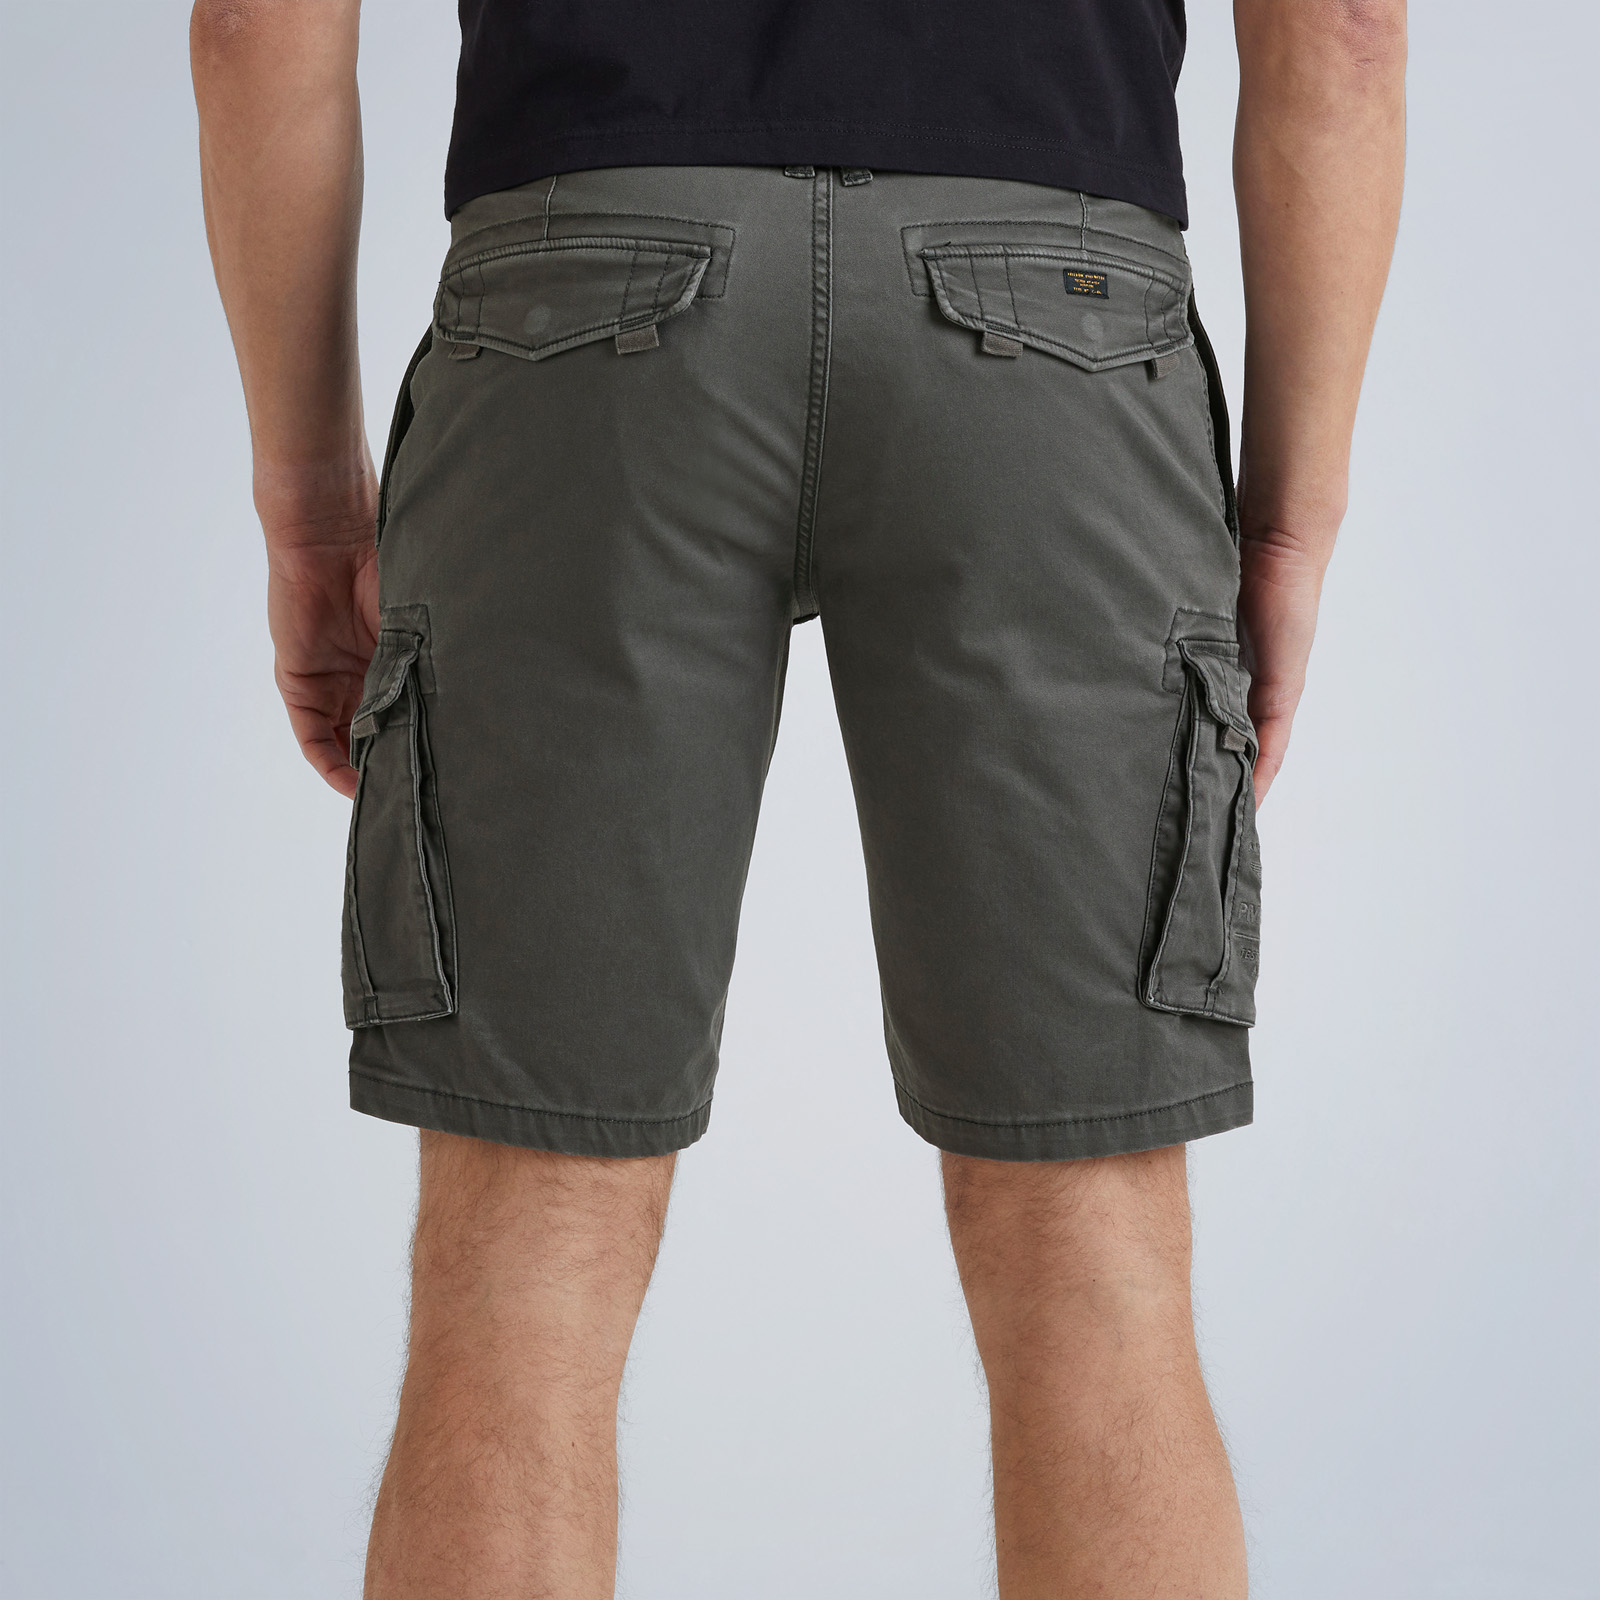 Stretch Short returns and LEGEND | PME Cargo Twill Free shipping |